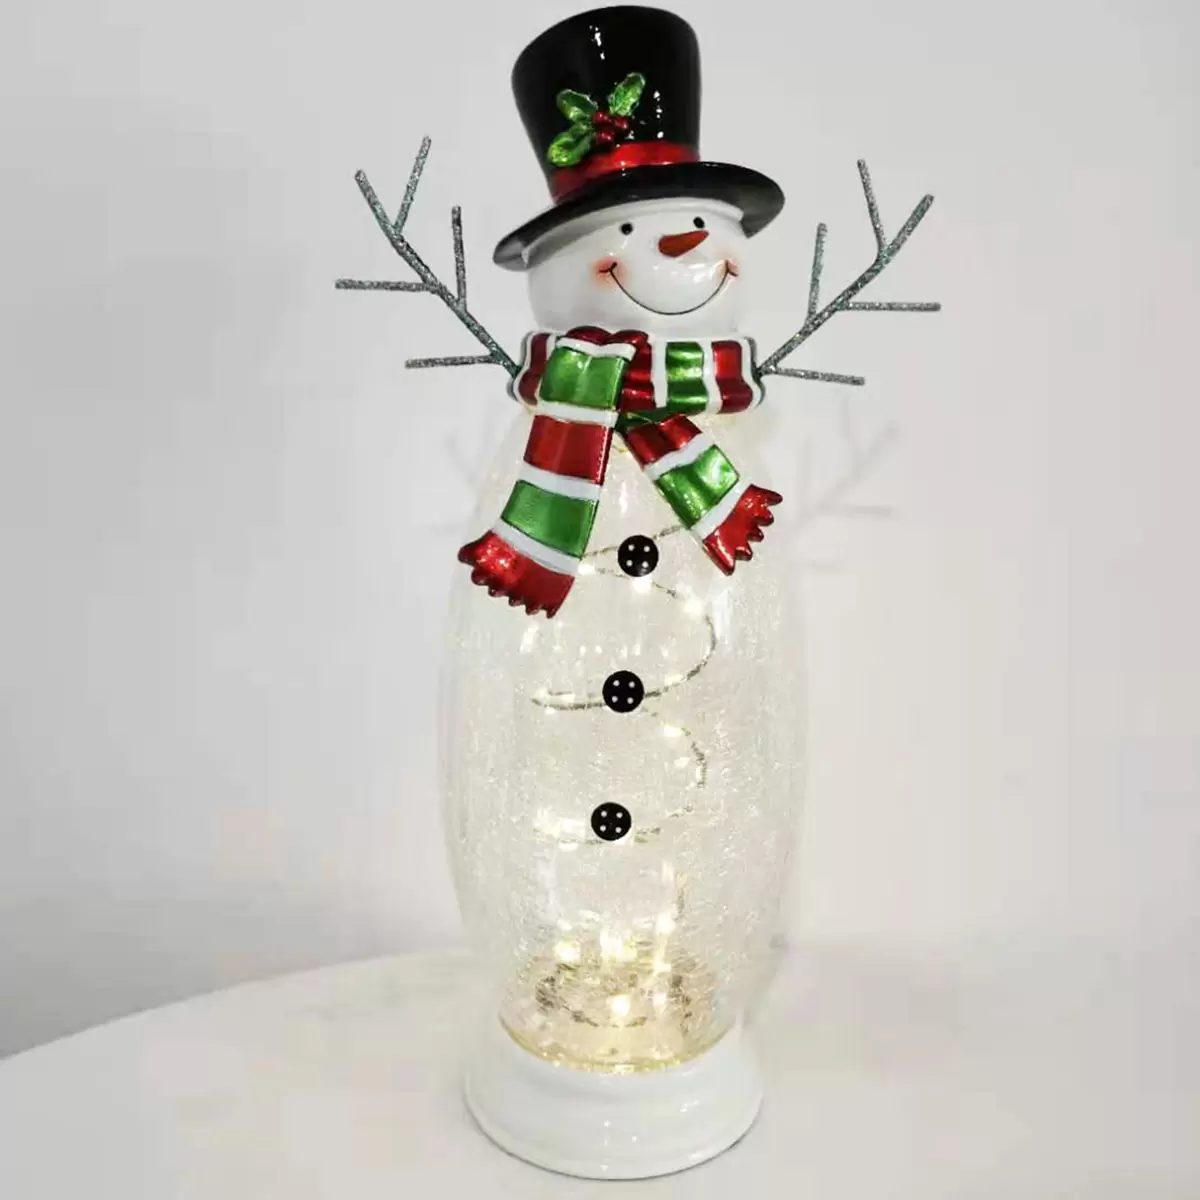 Buy Crackle Glass Snowman & Moose Snowman Image at Costco.co.uk